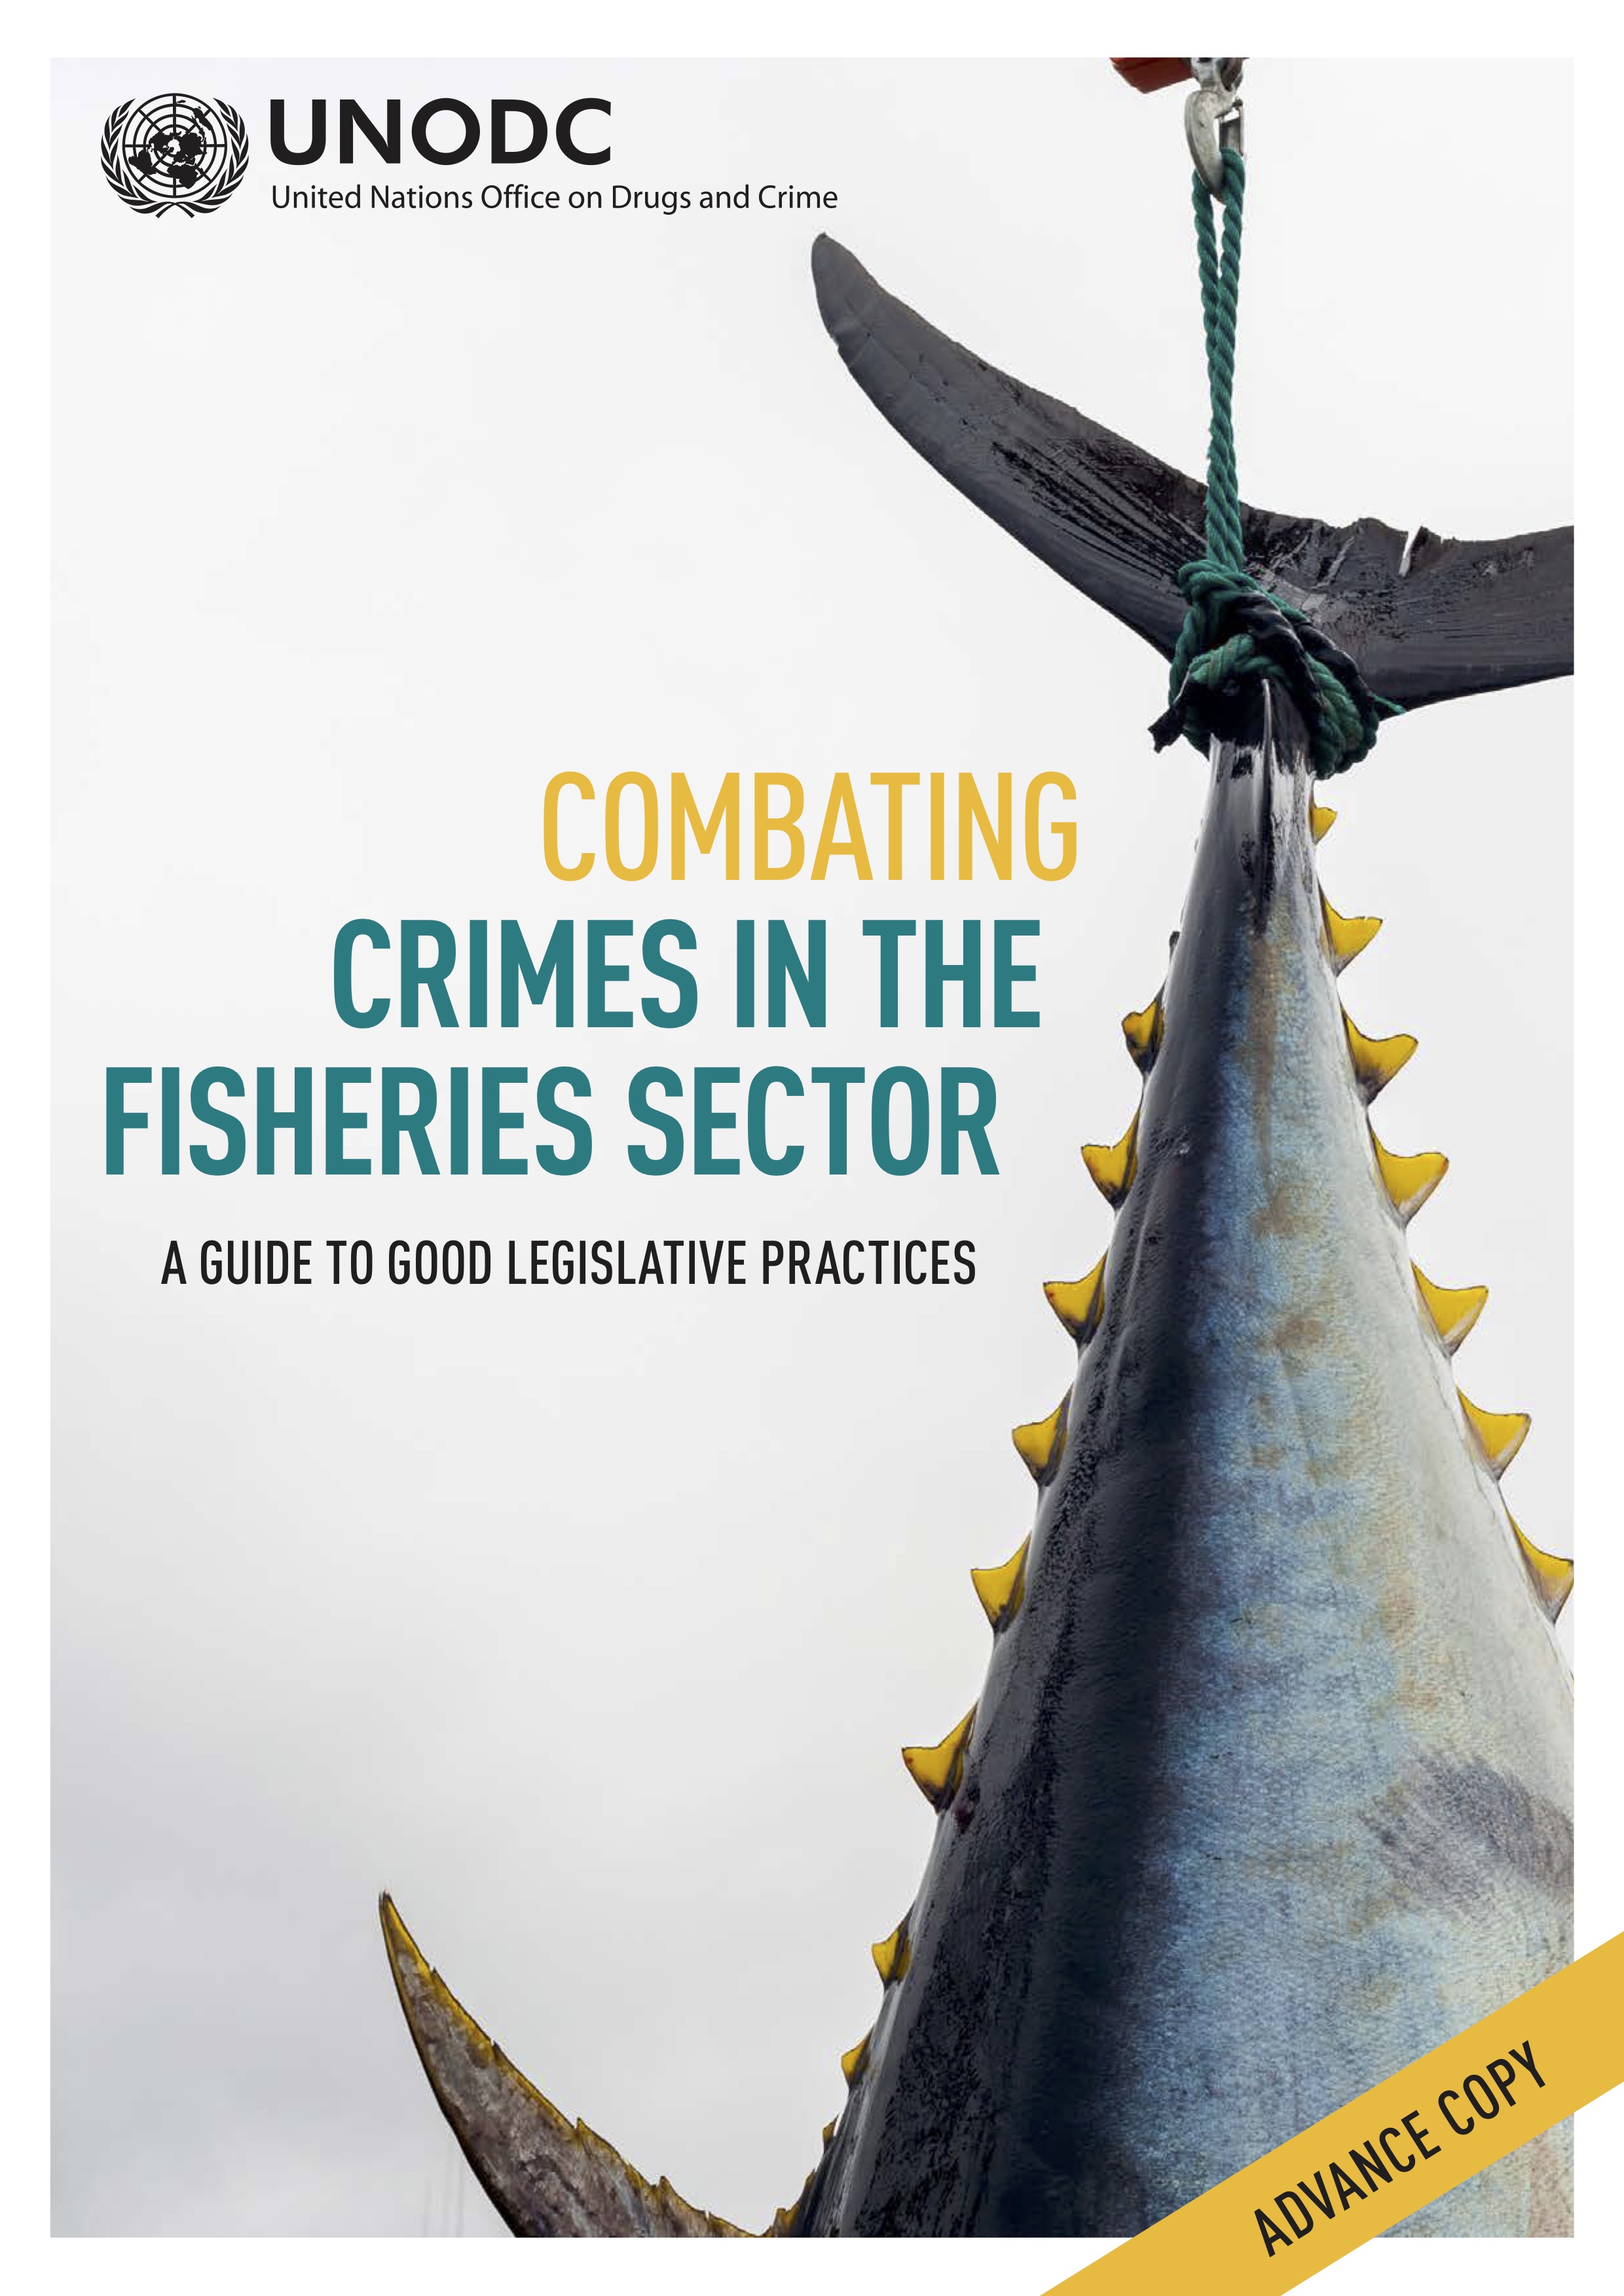 Cover page of the publication "Combating Crimes in the Fishieries Sector"